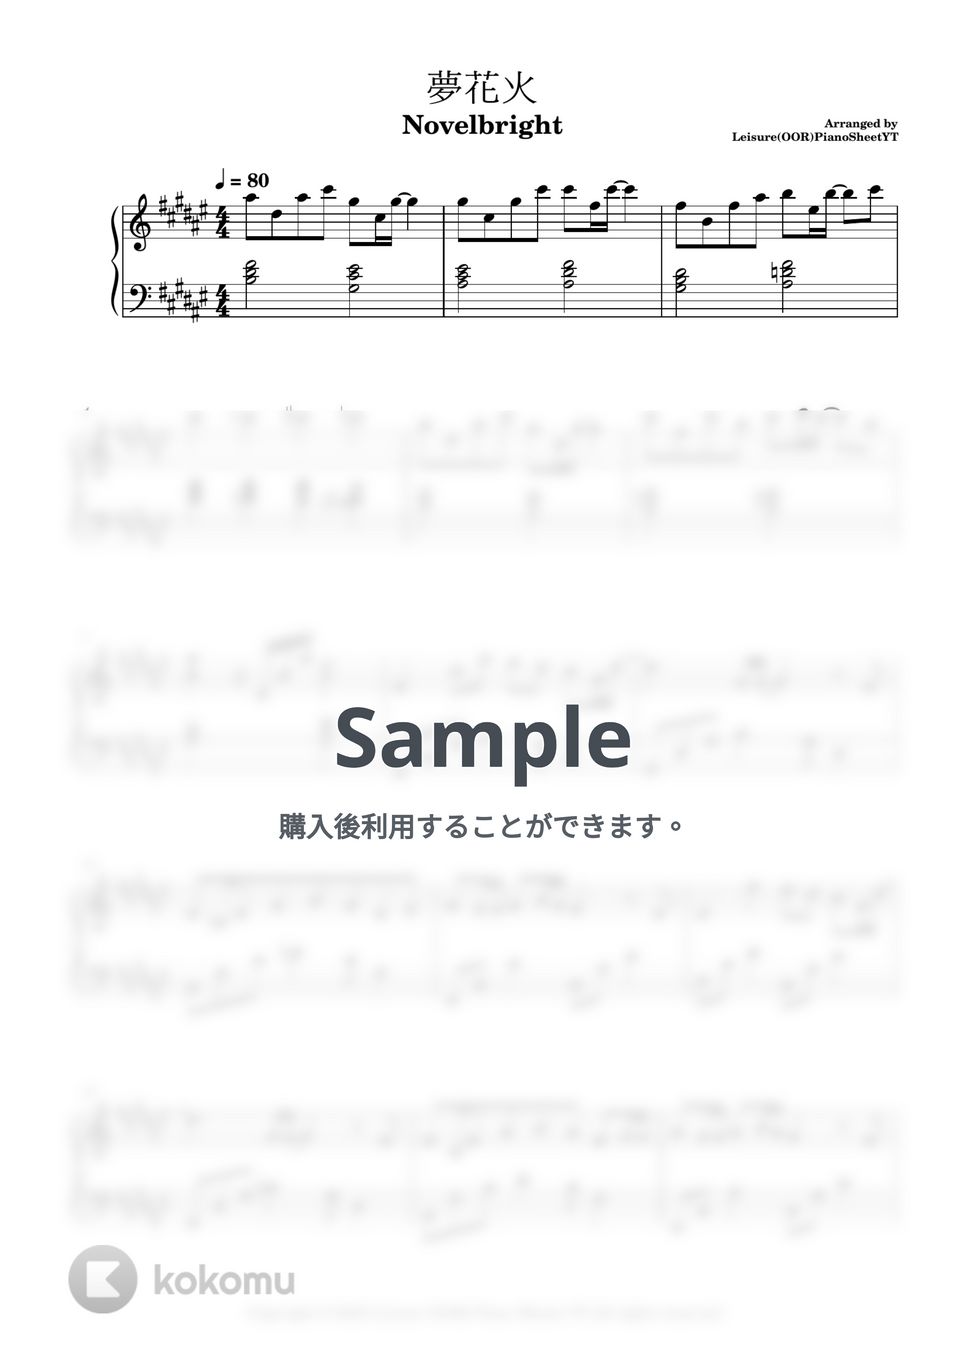 Novelbright - 夢花火 by Leisure (OOR) Piano Sheets YT